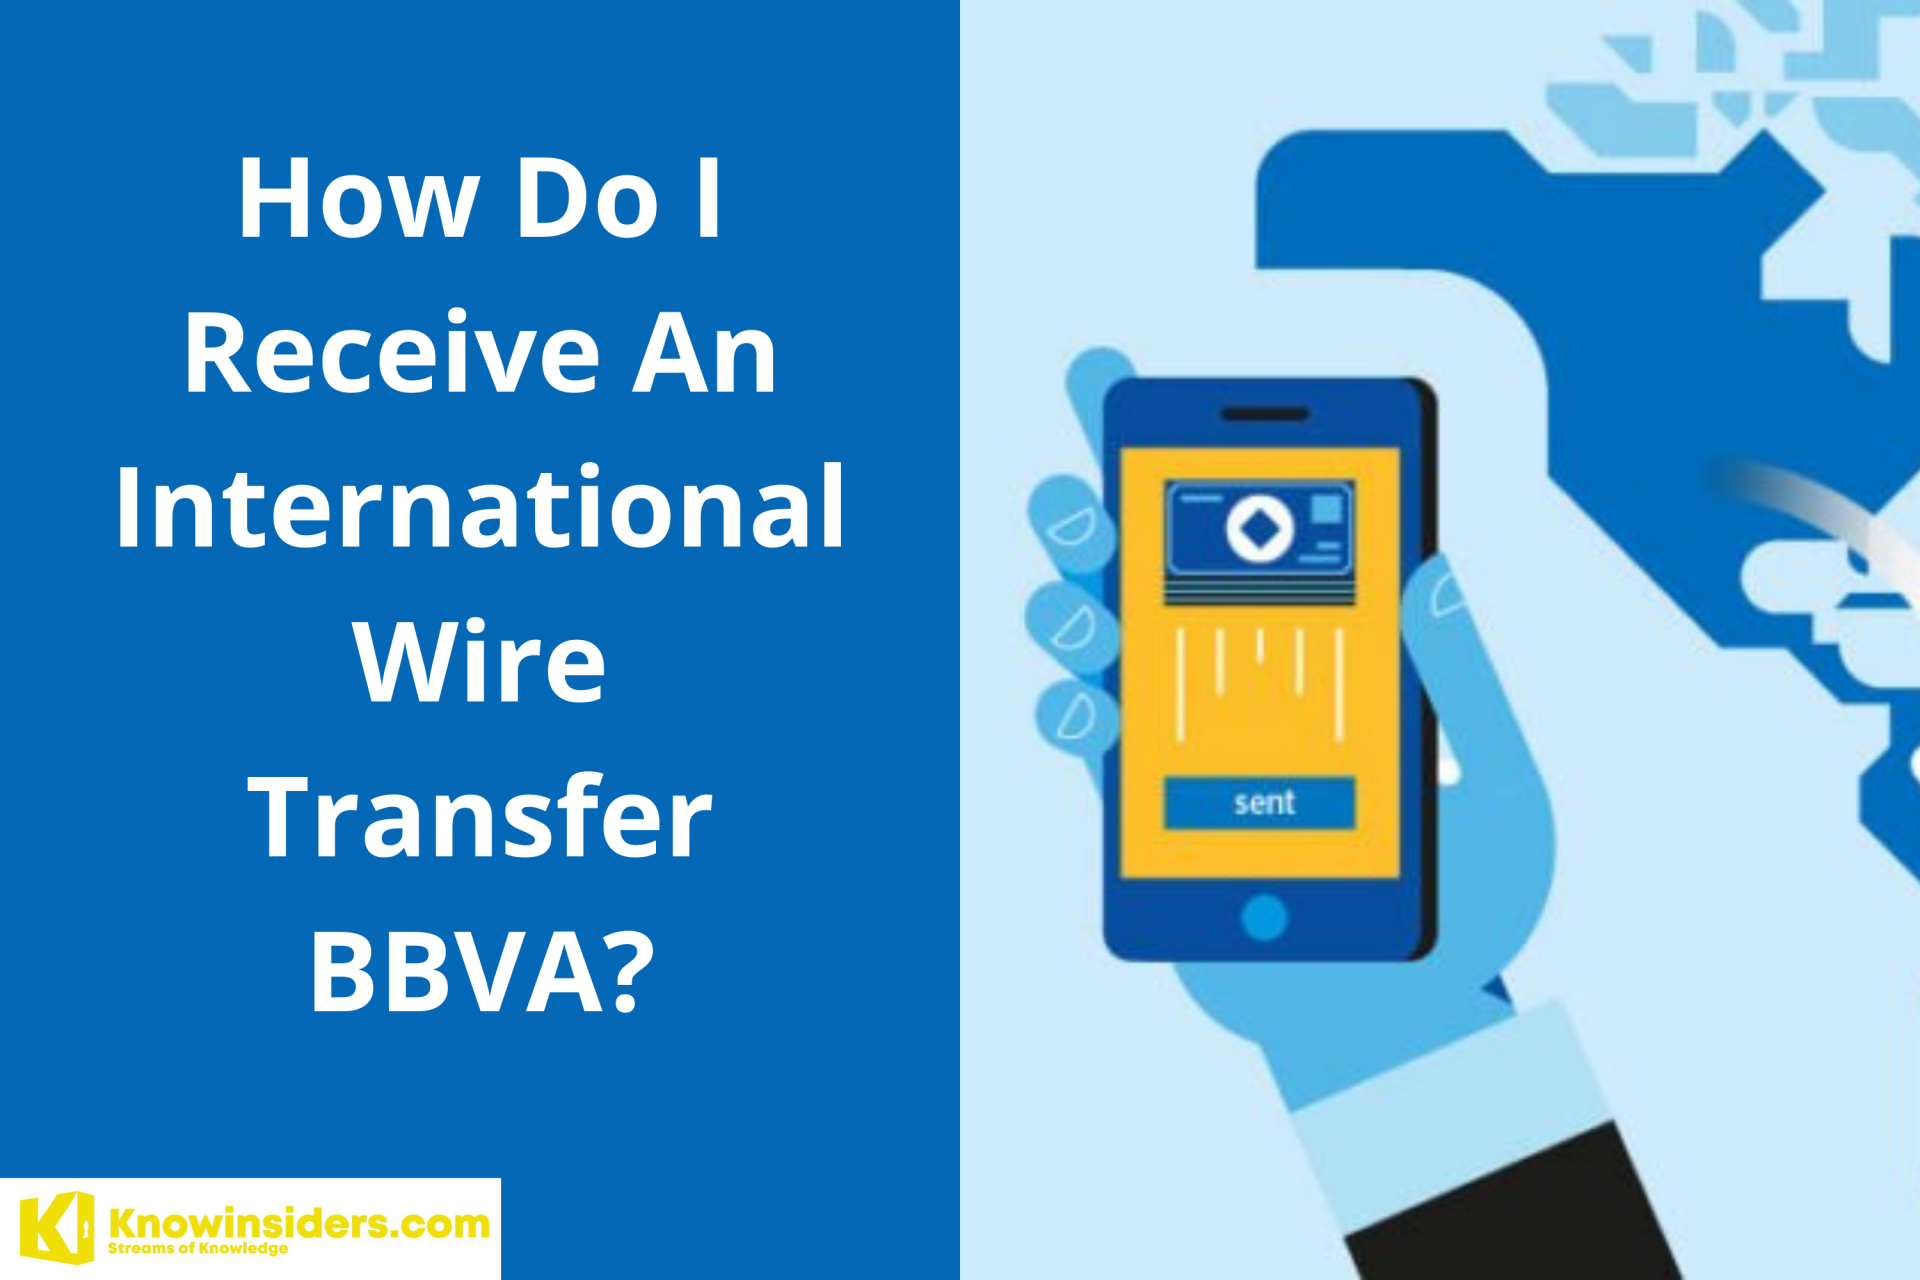 How to Receive An International Wire Transfer BBVA